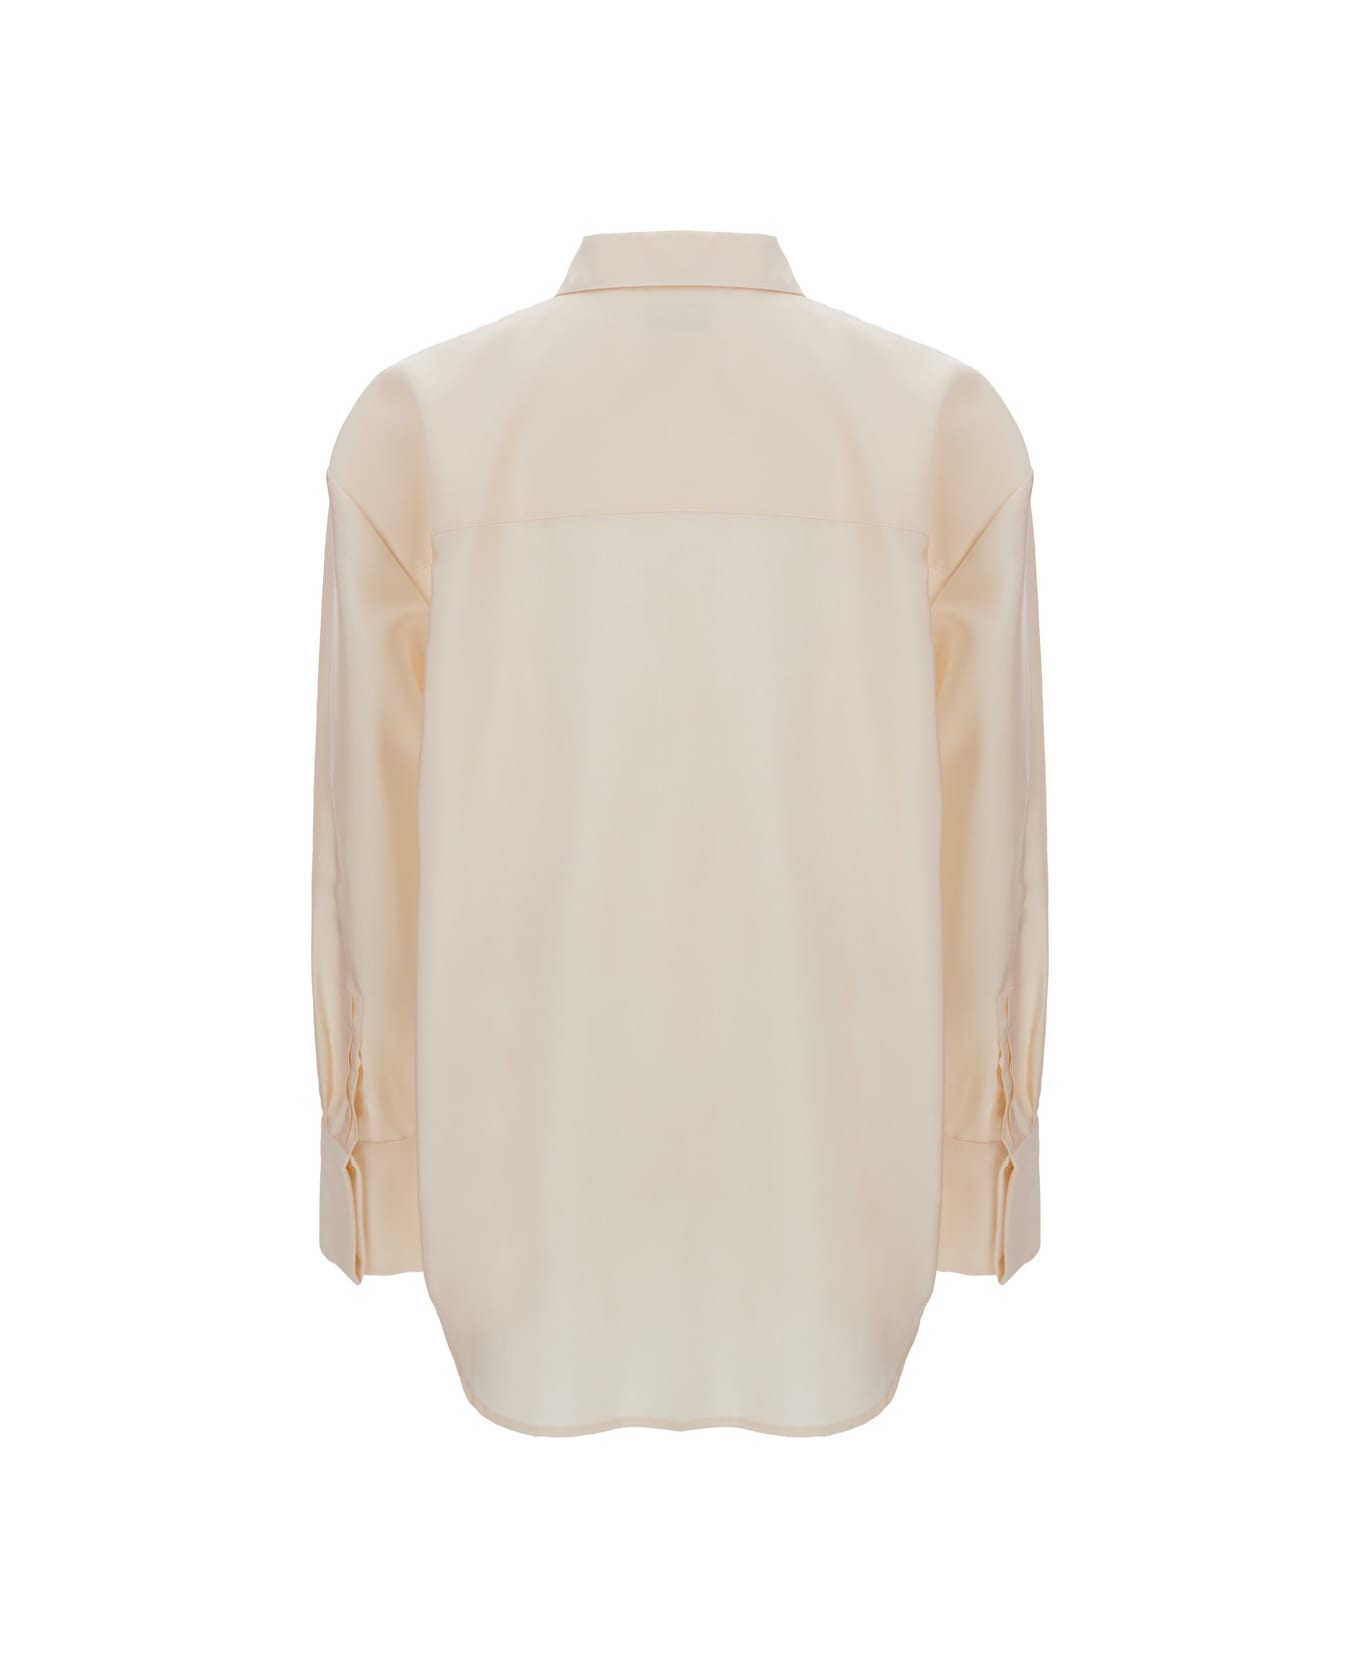 Saint Laurent Ivory White Buttoned Oversized Shirt In Technical Fabric Man - White シャツ